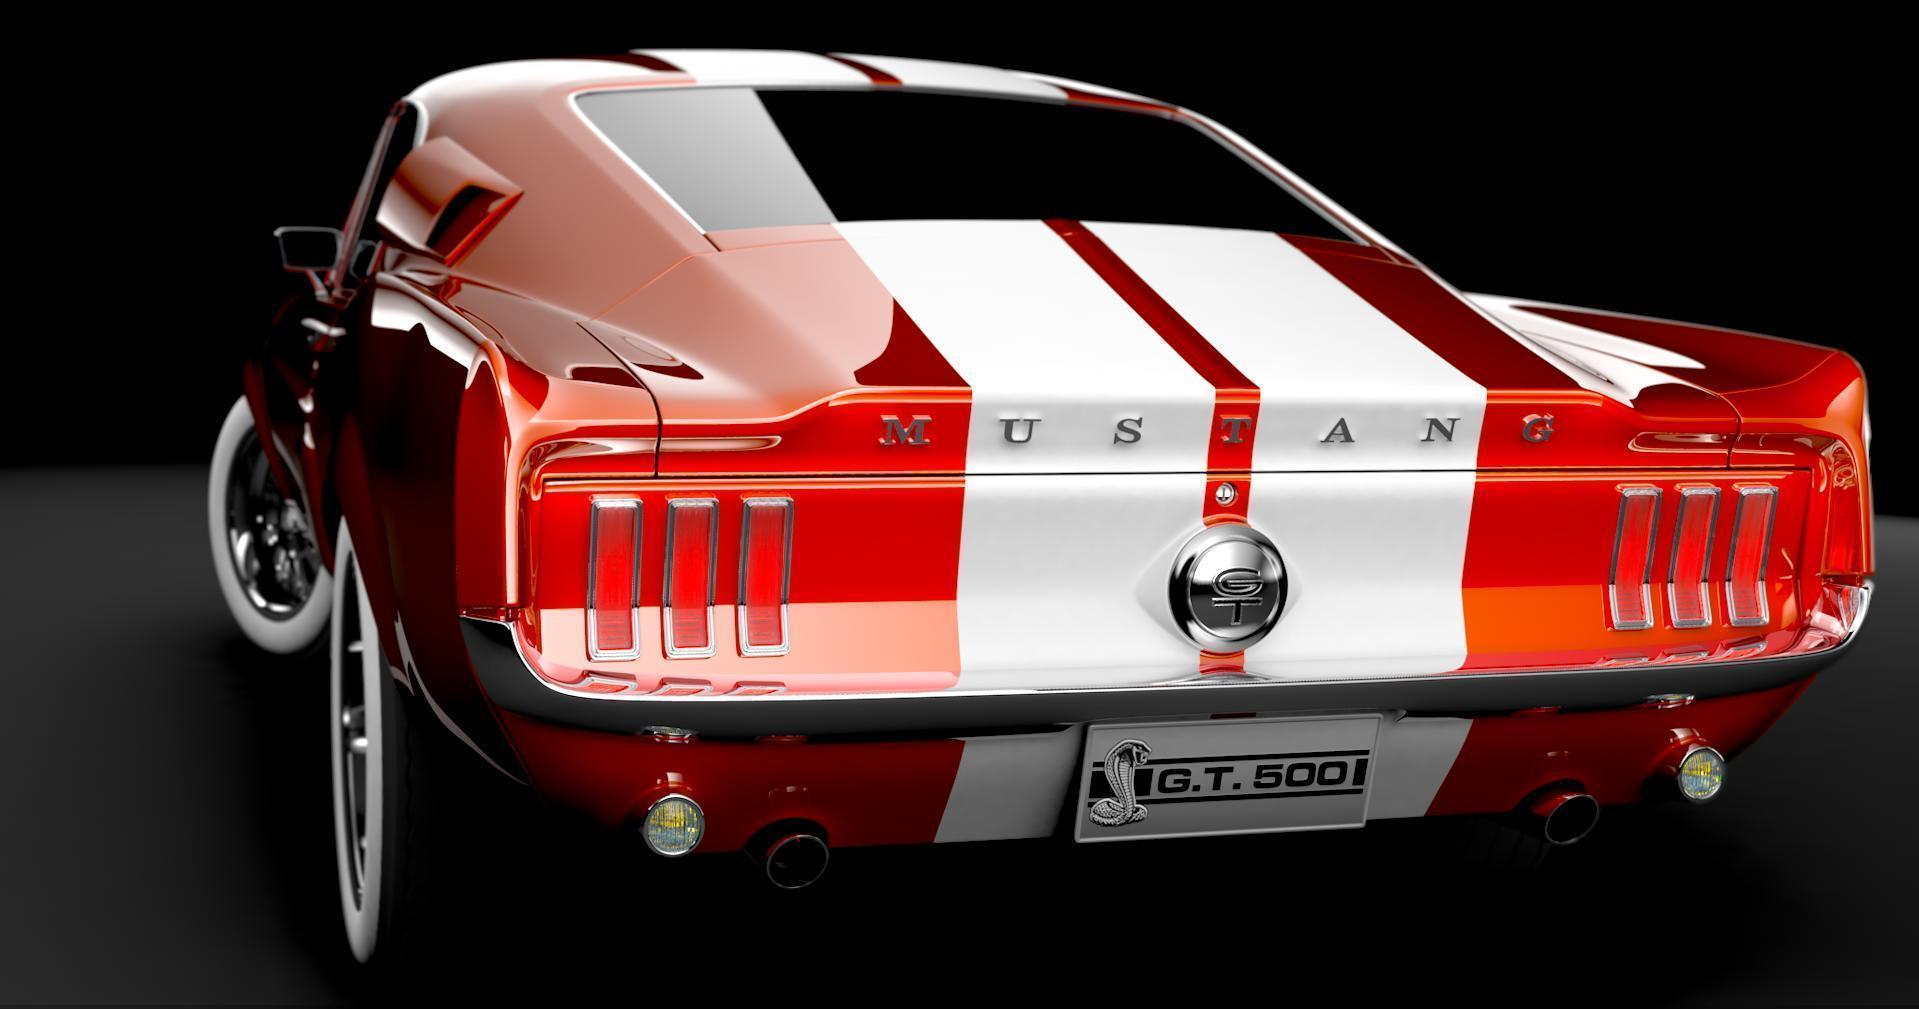 Ford Mustang 1967 HD Wallpaper. Download High Quality Resolution